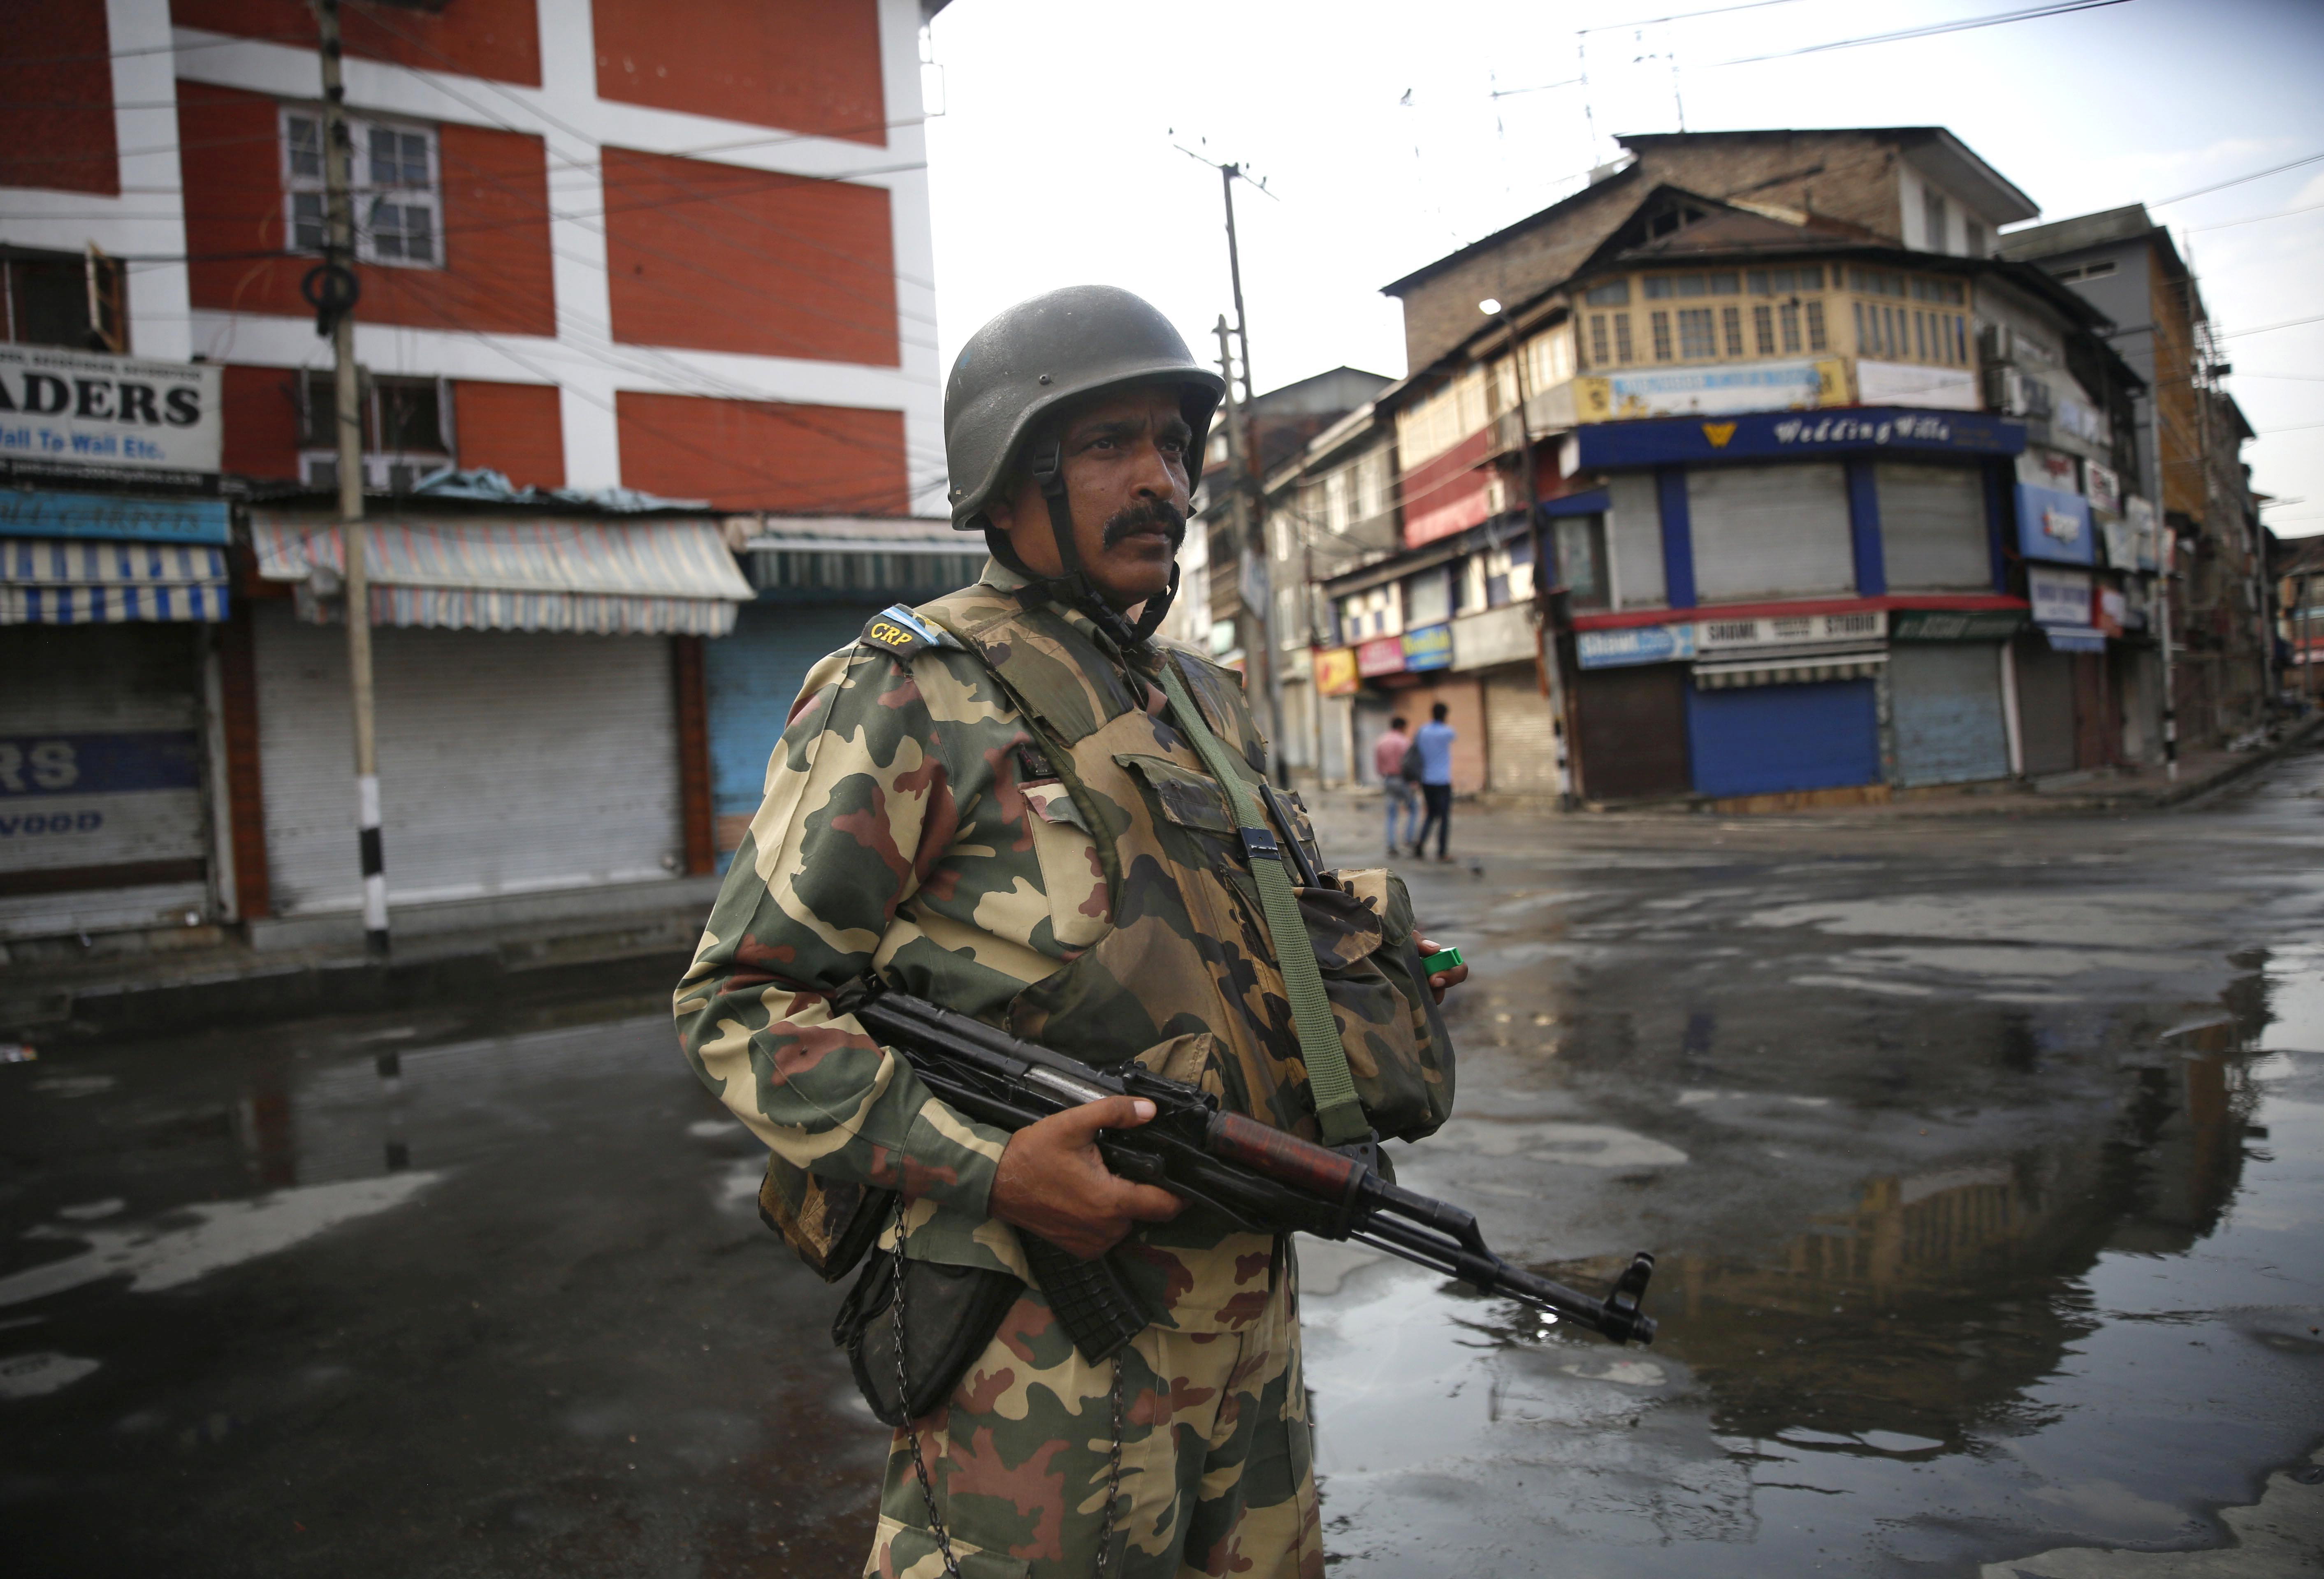 epa07762144 An Indian paramilitary soldier stands guard near a temporary barricade during restriction in Srinagar, India, 08 August 2019. Indian Home Minister Amit Shah on 05 August moved a resolution in the parliament that repeals Article 370 and remove the special constitutional status granted to the disputed Kashmir region. Since the announcement, the Indian-administered Kashmir region is under heavy lockdown with a restriction on public gatherings. Leaders in the region were also put under house arrest.  EPA/FAROOQ KHAN